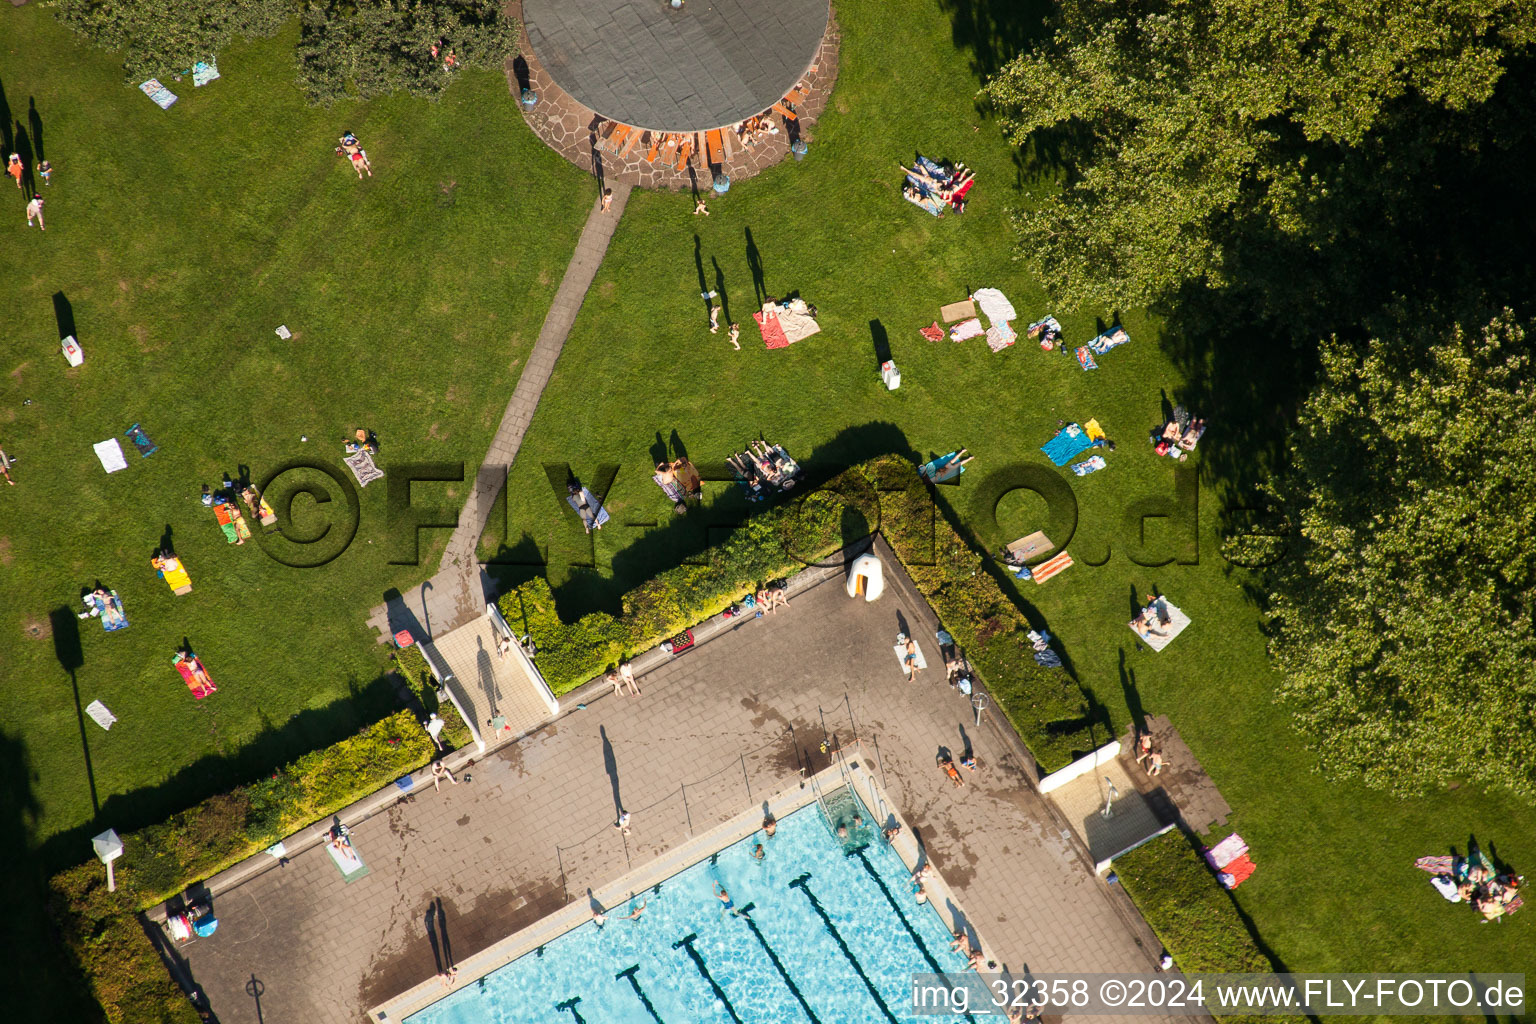 Bathers on the lawn by the pool of the swimming pool Rueppurr in Karlsruhe in the state Baden-Wurttemberg